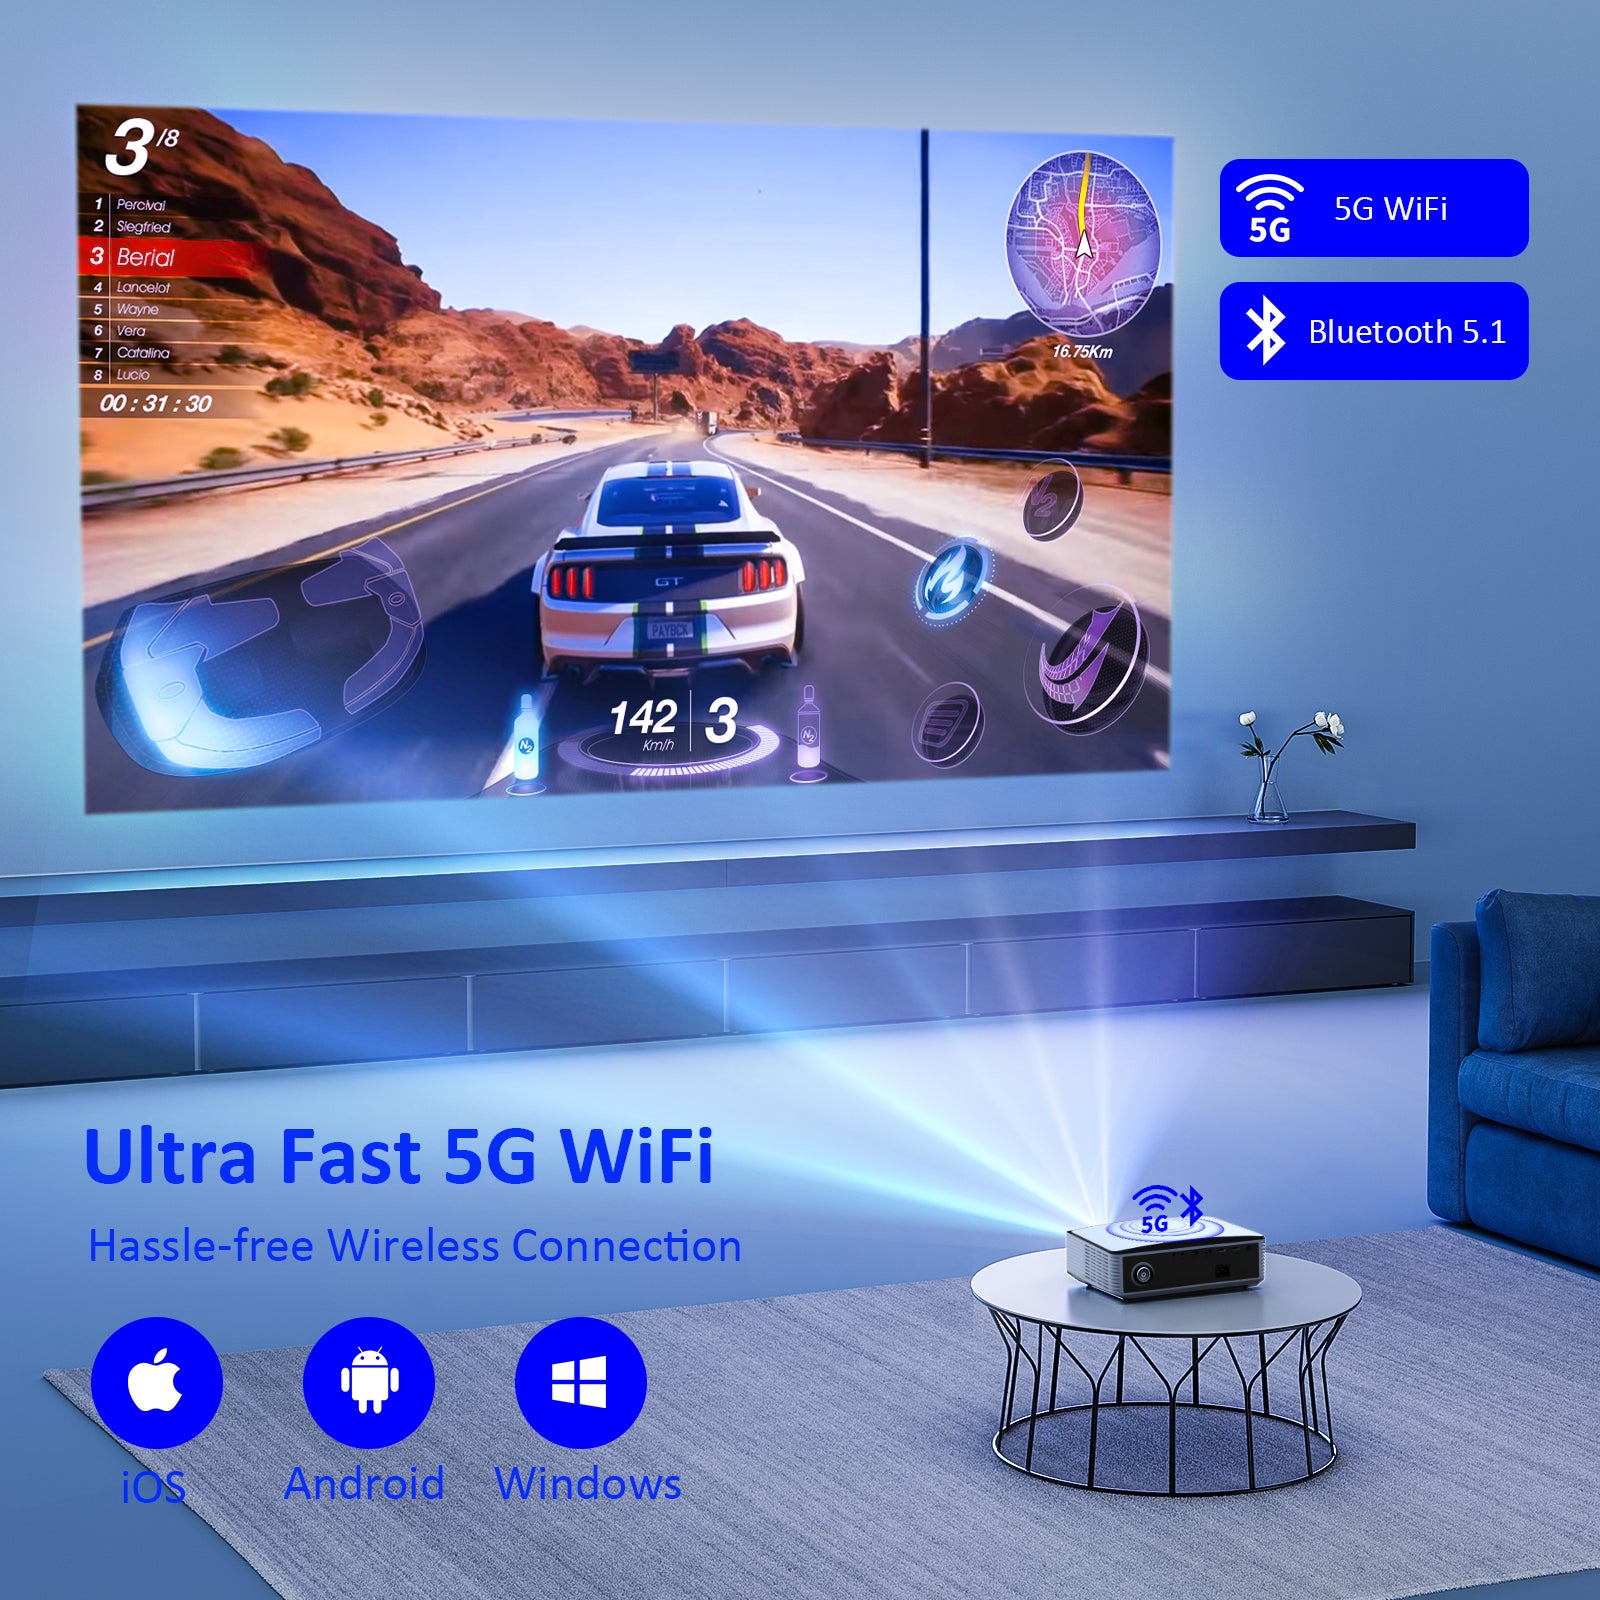 The projector supports 5G WiFi and can project the iAmge of a mobile phone onto a wall.